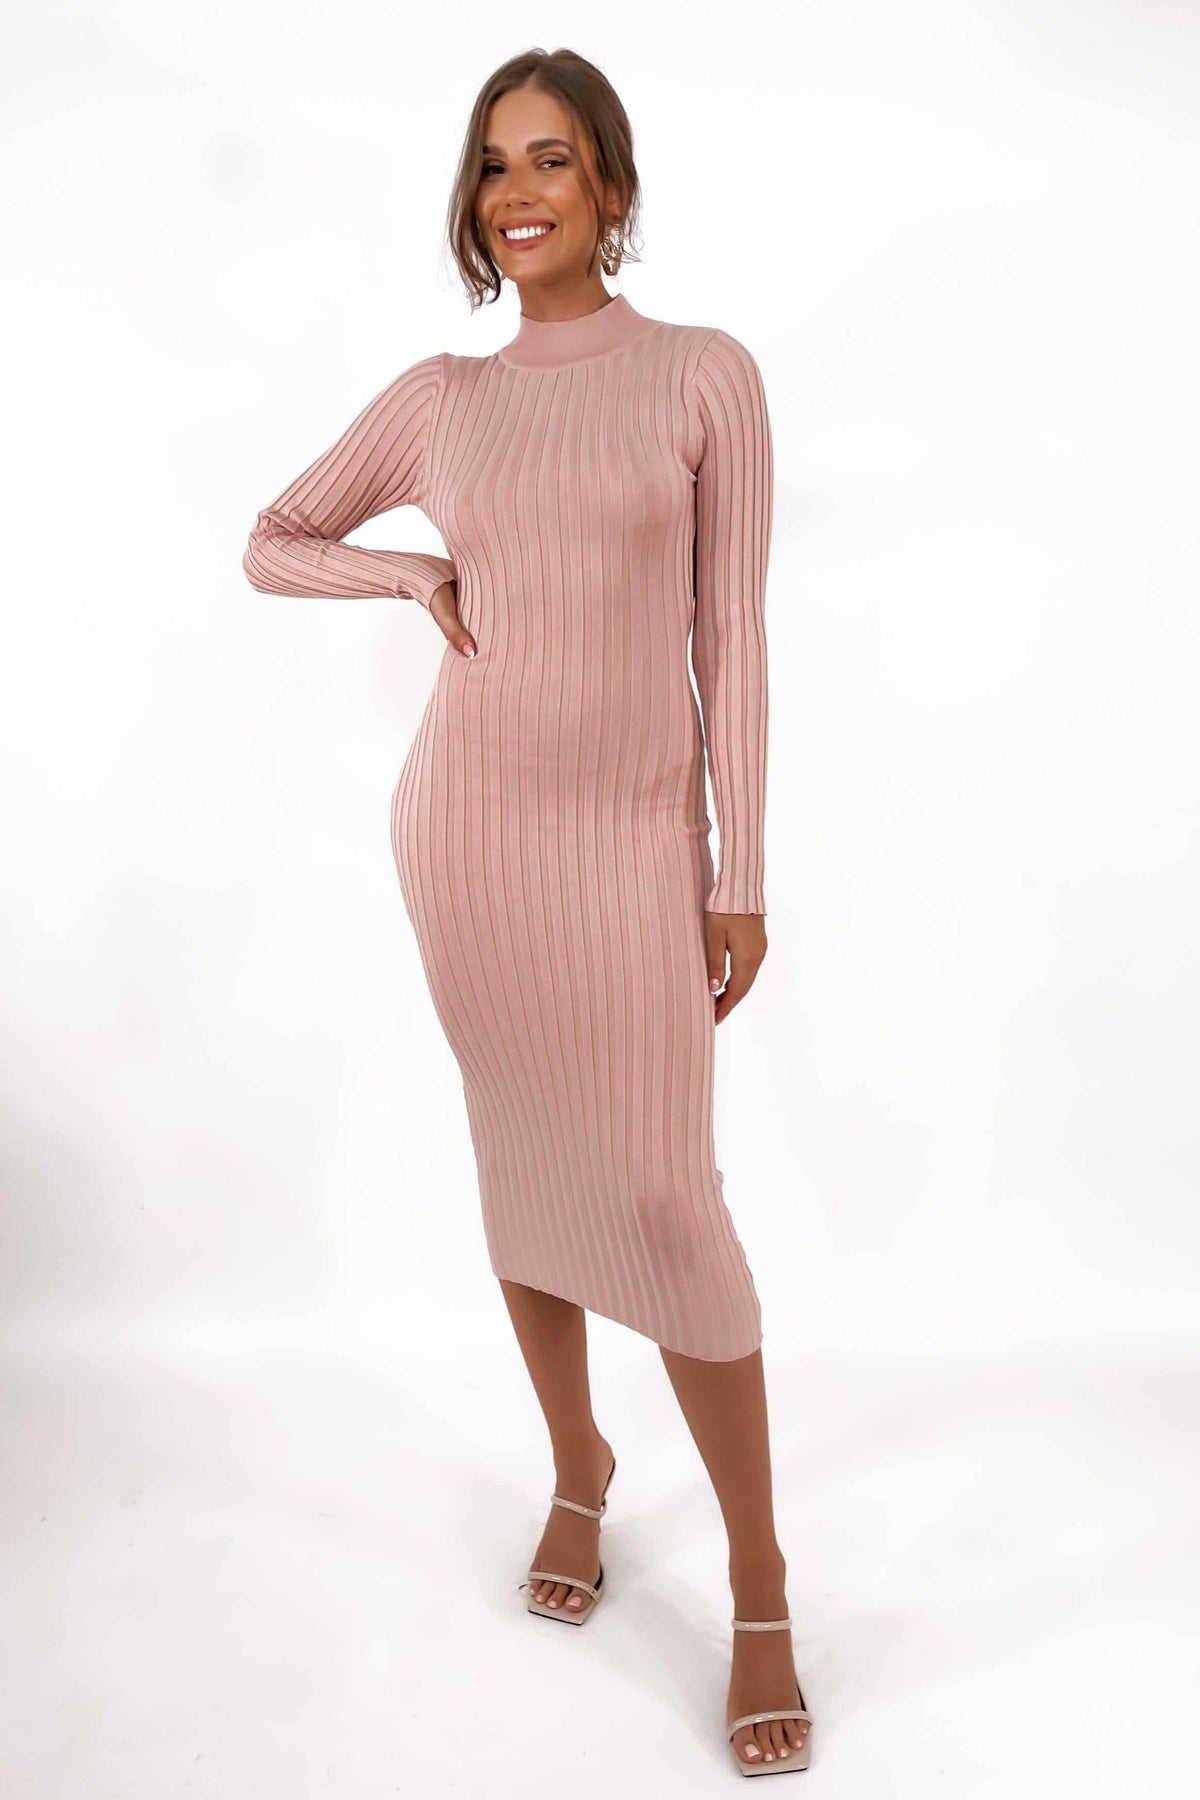 Leigh Dress, DRESS, DRESSES, HIGH NECK, LONG SLEEVE, MIDI DRESS, NYLON, OPEN BACK, PINK, RIBBED, SALE, VISCOSE, Leigh Dress only $69.00 @ MISHKAH ONLINE FASHION BOUTIQUE, Shop The Latest Women&#39;s Dresses - Our New Leigh Dress is only $69.00, @ MISHKAH ONLINE FASHION BOUTIQUE-MISHKAH